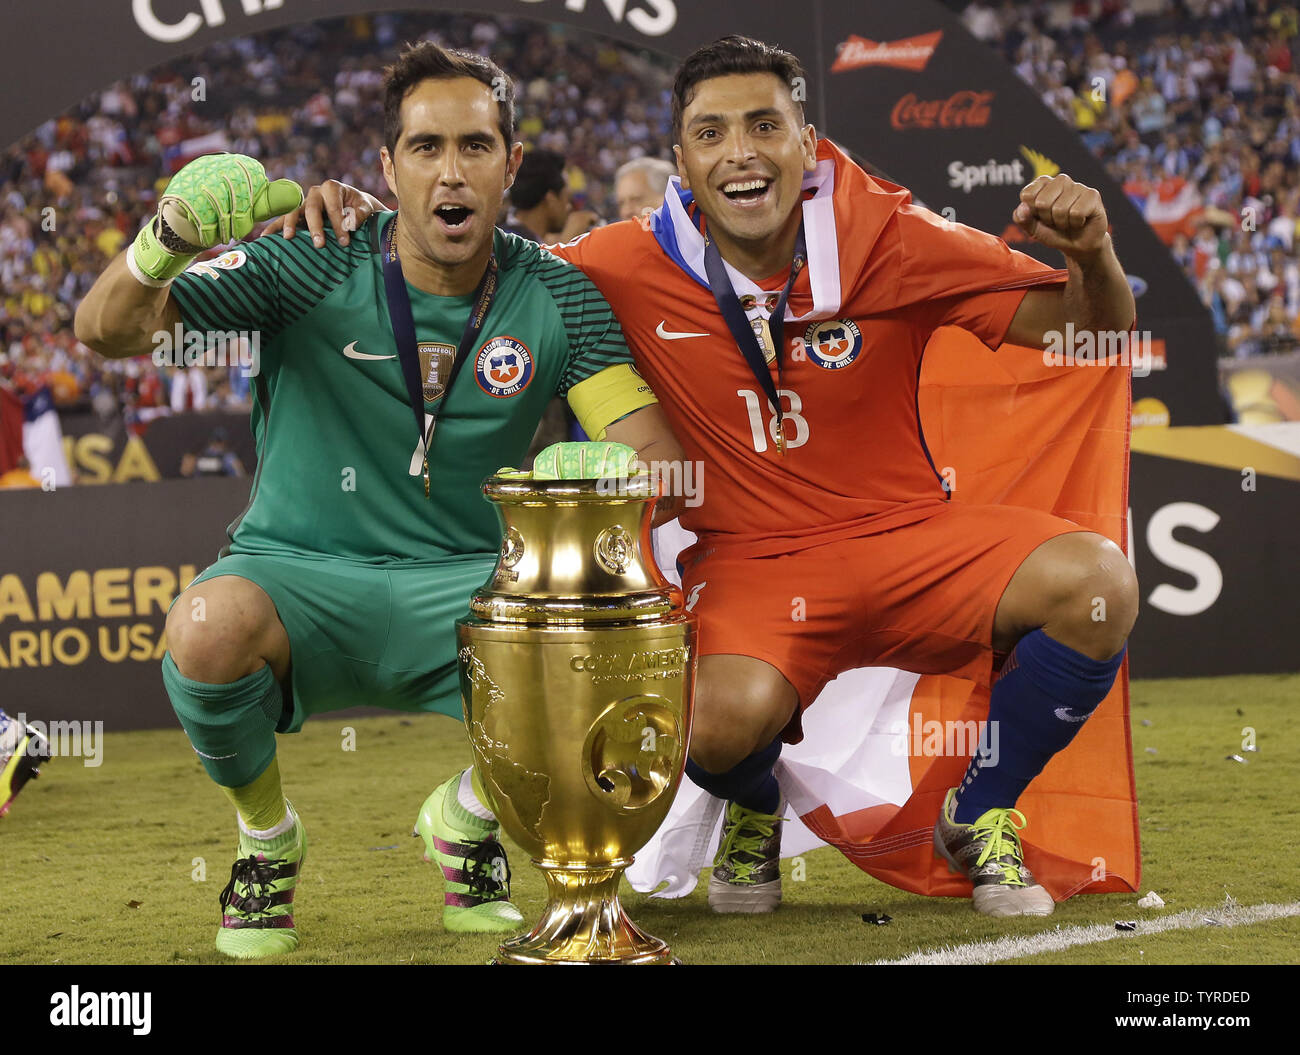 Claudio Bravo and Gonzalo Jara of Chile celebrate on the field after there team defeats Argentina at the Copa America Centenario USA 2016 Finals at MetLife Stadium in East Rutherford, New Jersey on June 26, 2016. Chile defeated Argentina 4-2 in penalty kicks and won there second consecutive Copa America.     Photo by John Angelillo/UPI Stock Photo